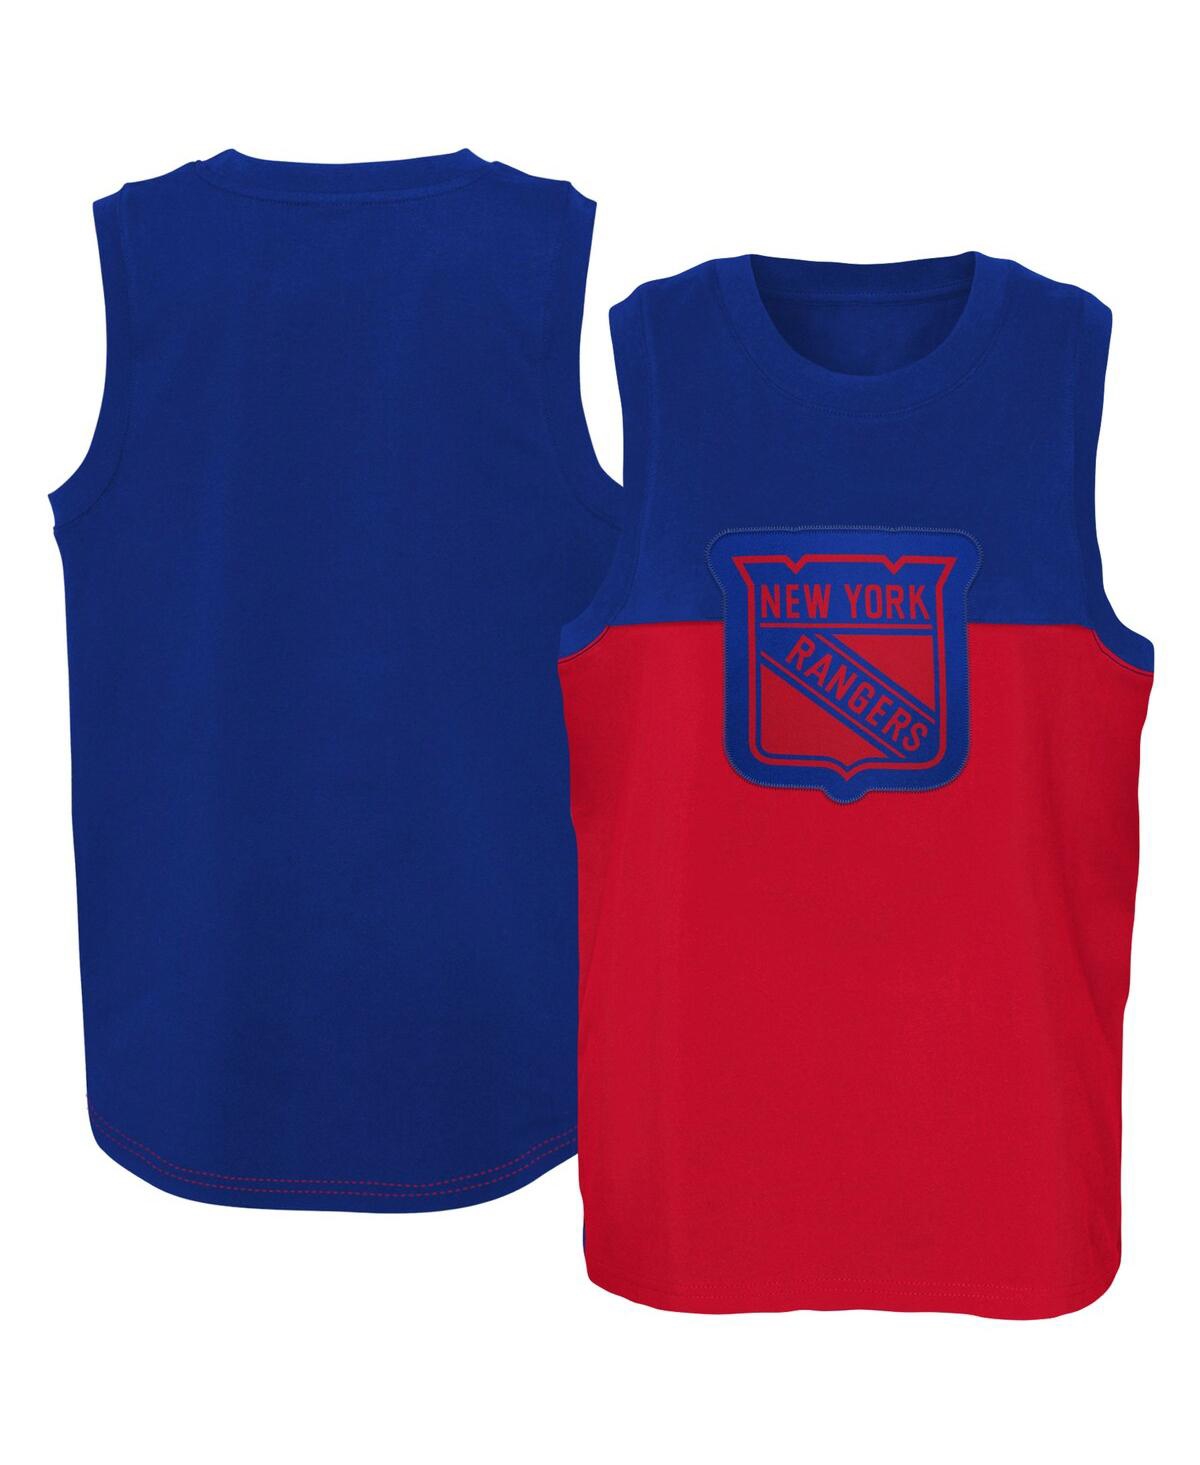 Outerstuff Kids' Big Boys And Girls Blue, Red New York Rangers Revitalize Tank Top In Blue,red